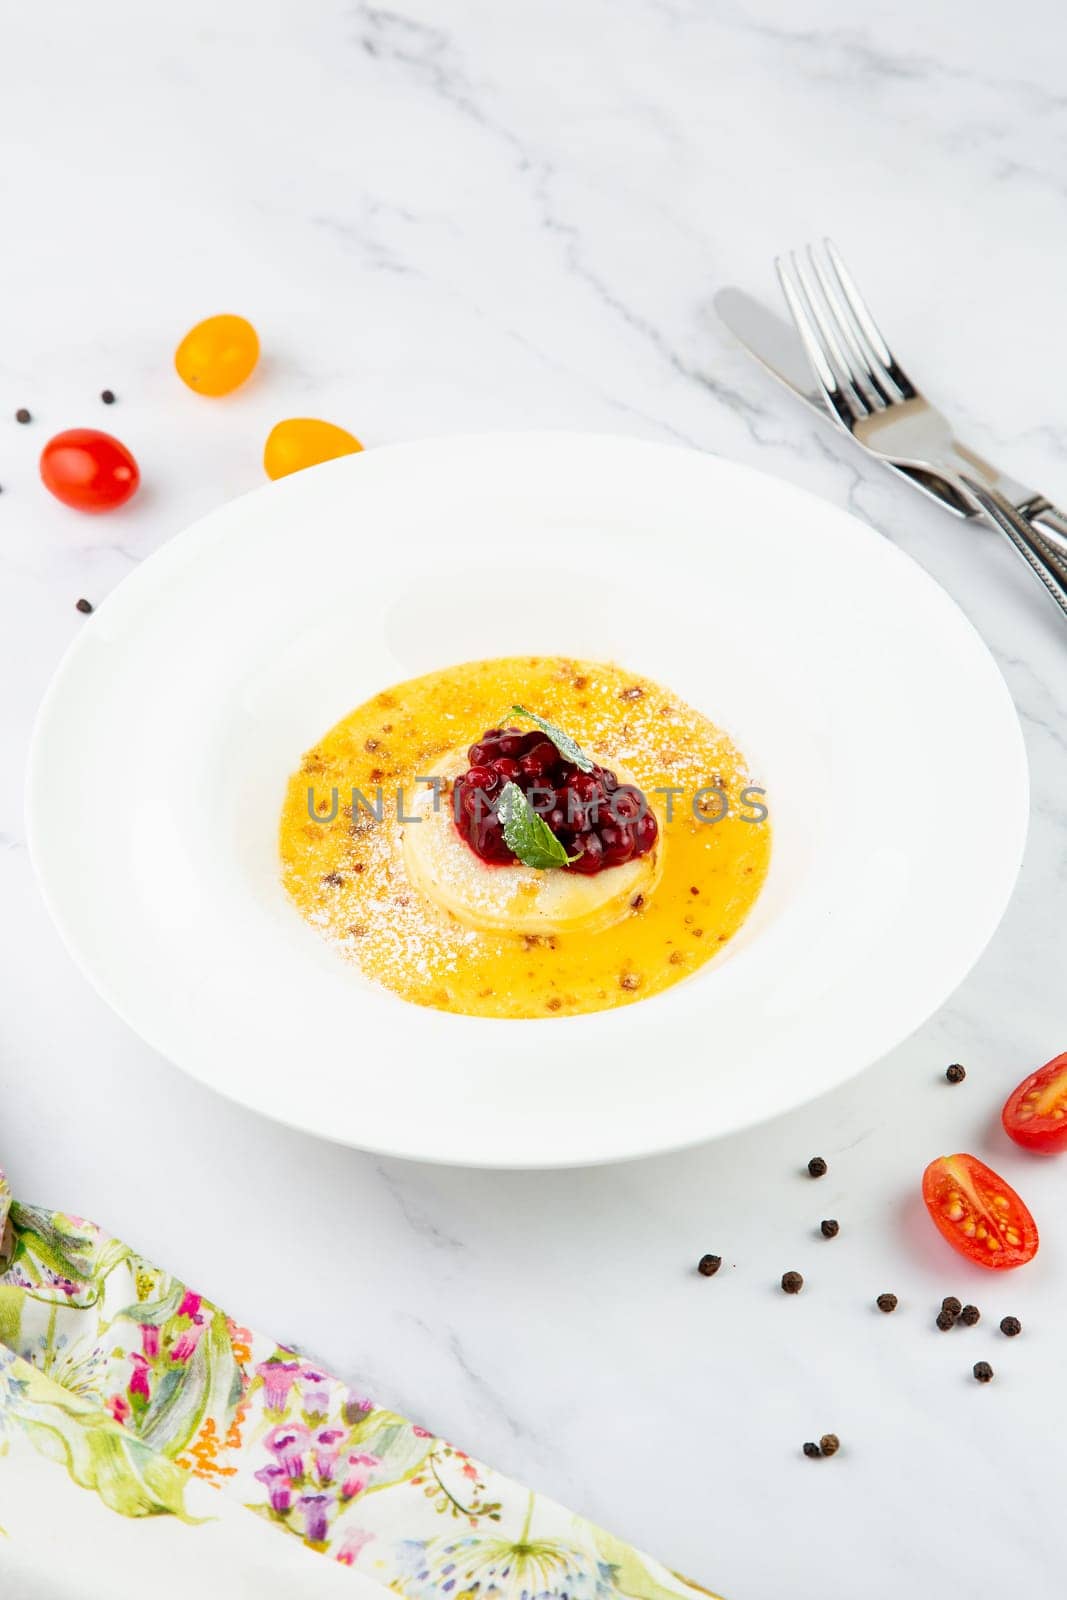 Ginger pumpkin soup with dumplings and berries. White background